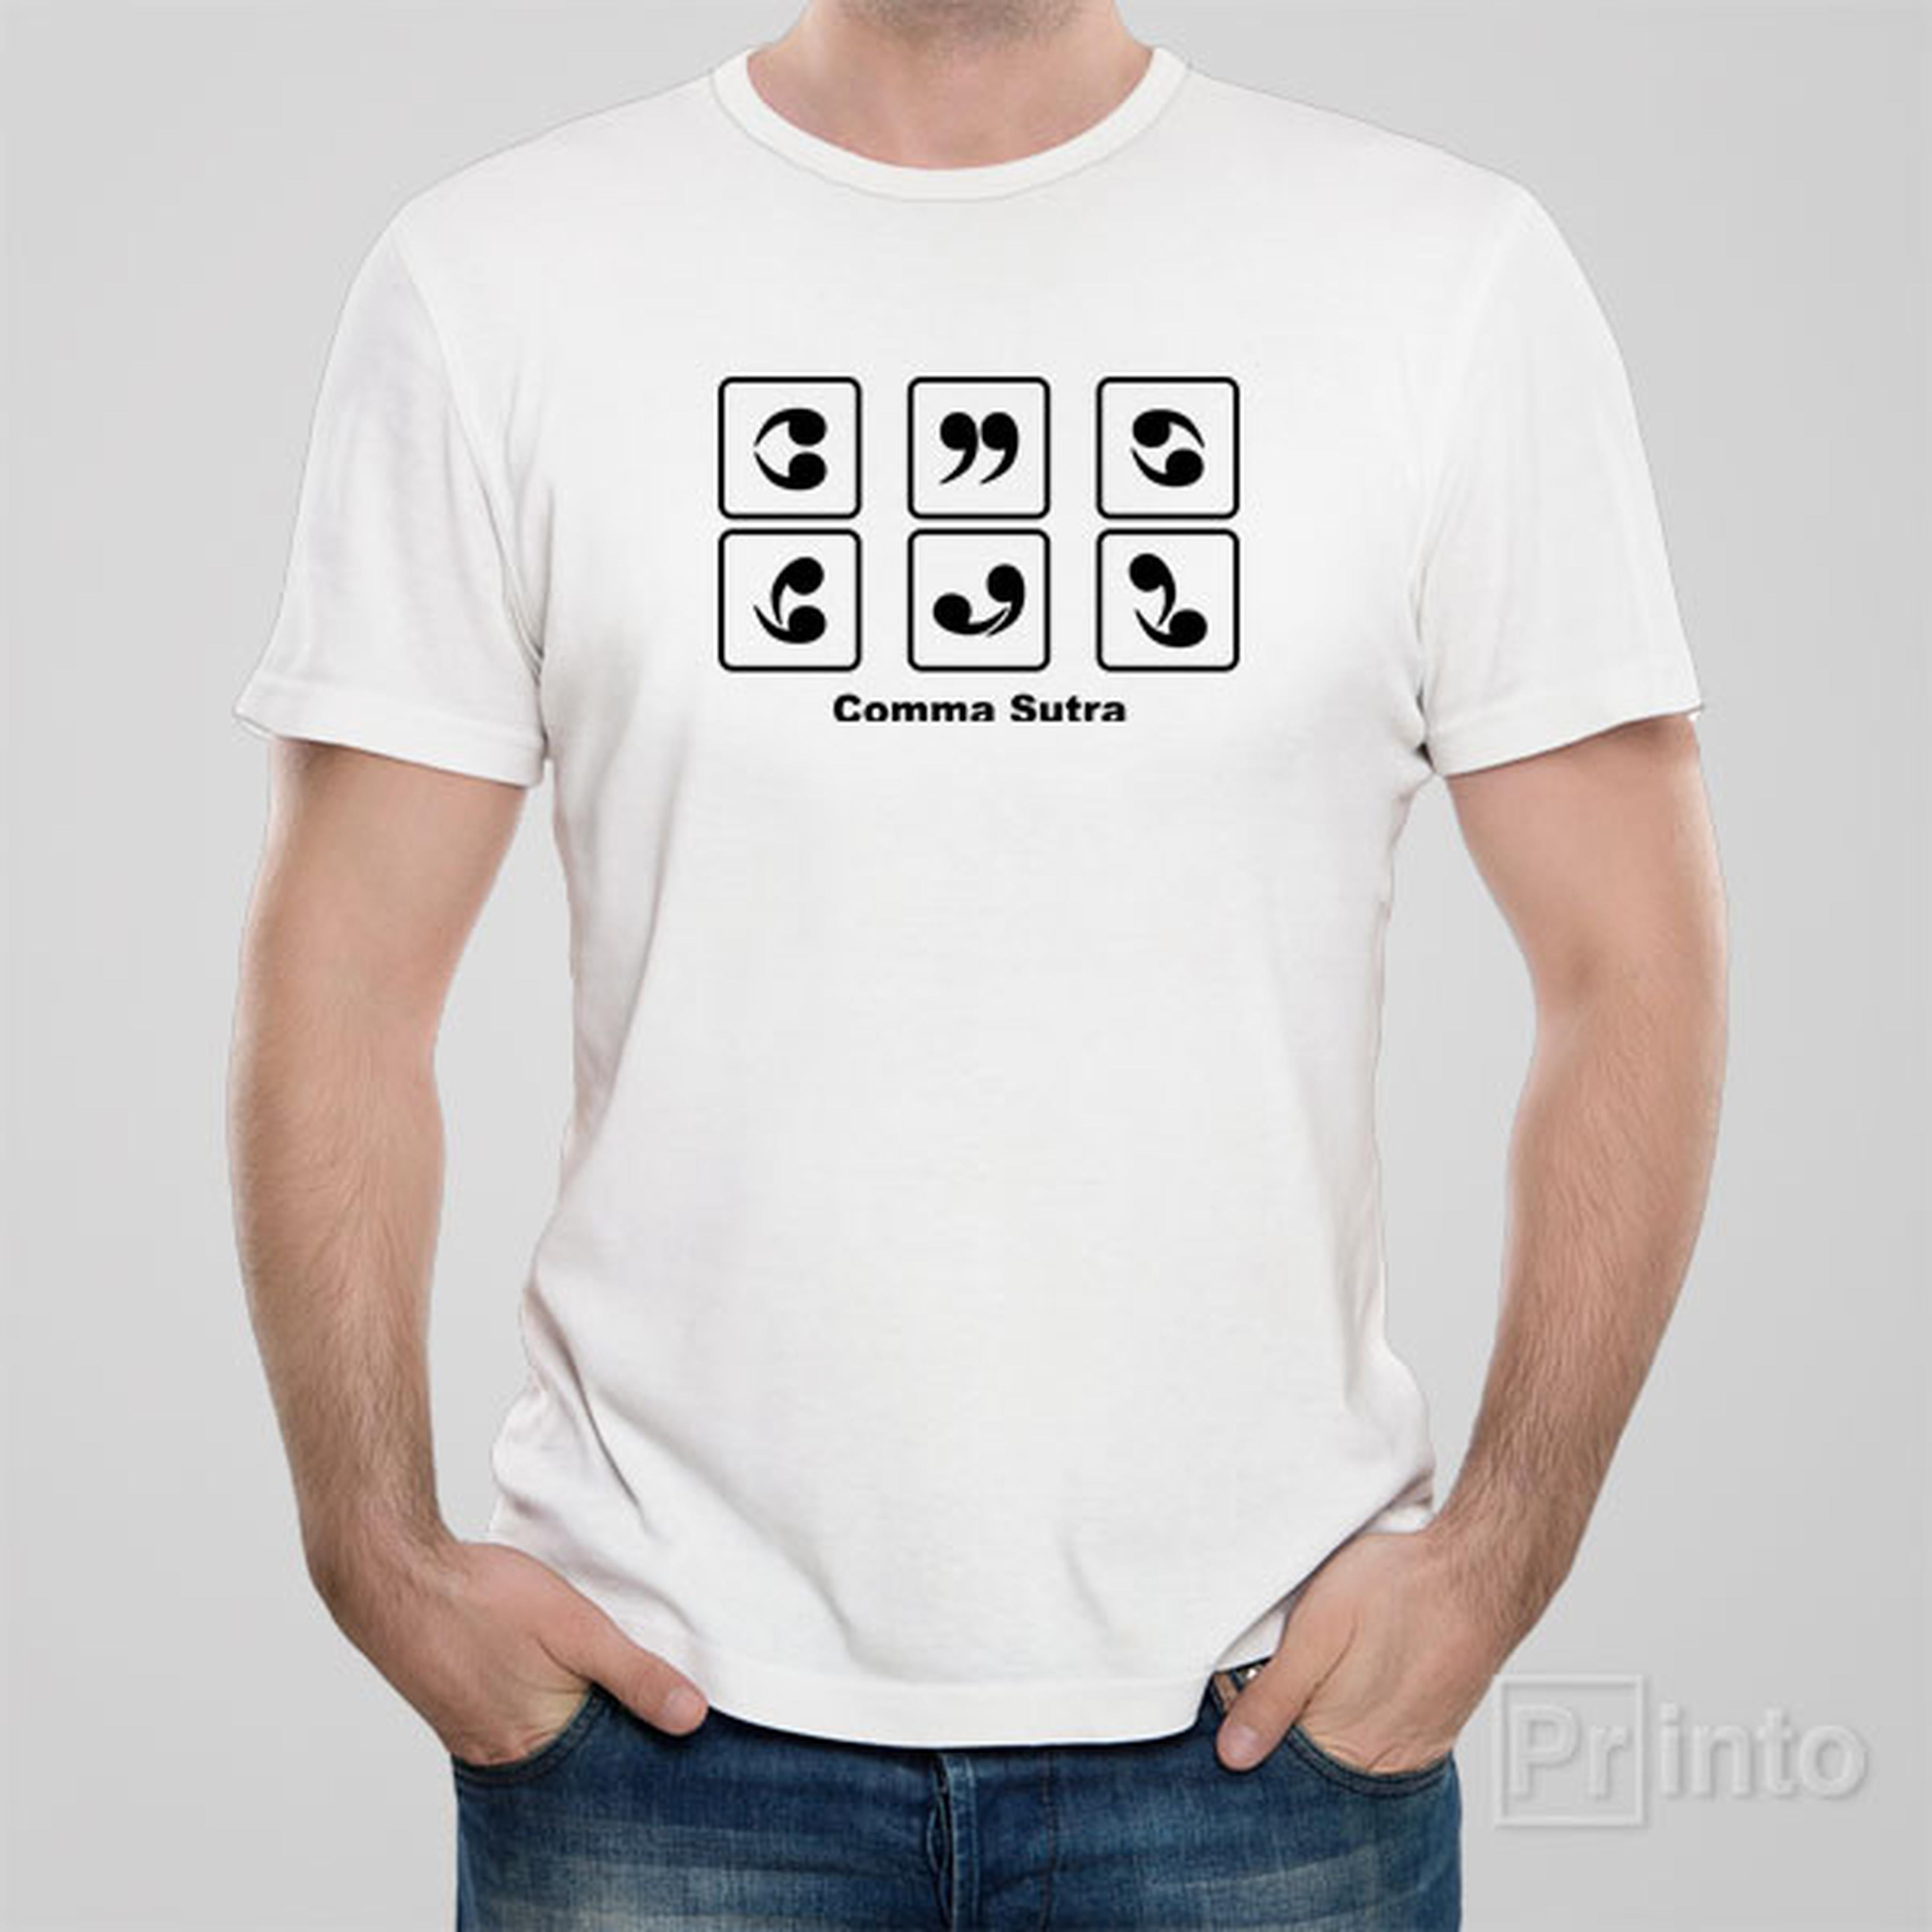 comma-sutra-t-shirt